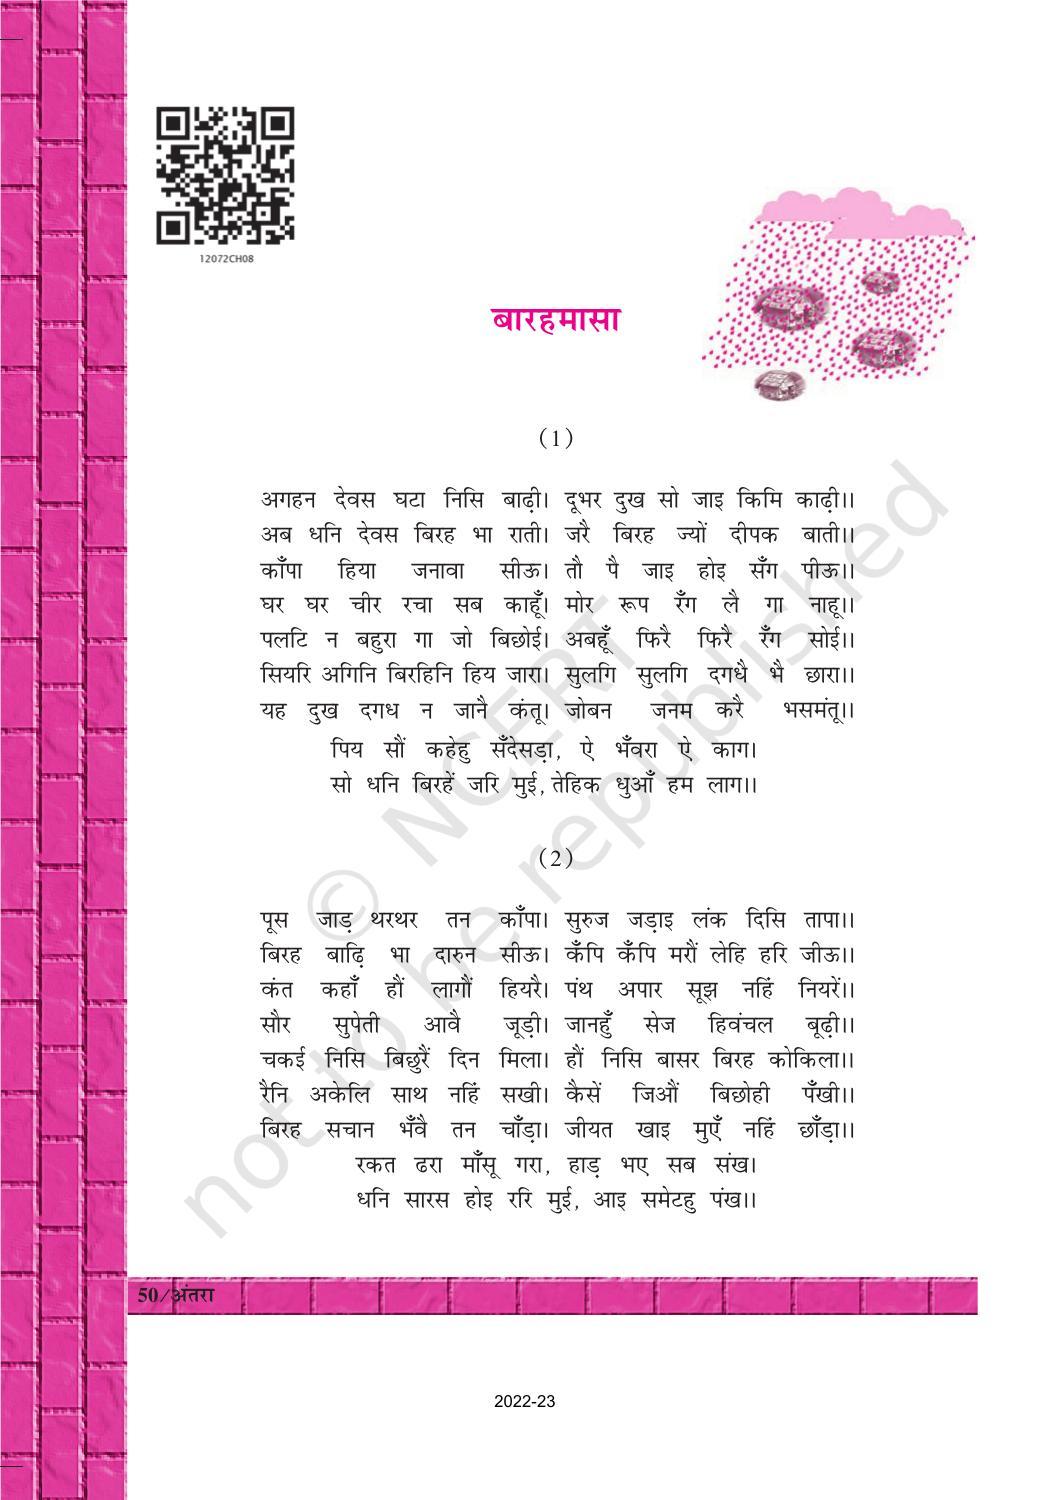 NCERT Book for Class 12 Hindi Antra Chapter 8 मलिक मुहम्मद जायसी - Page 3